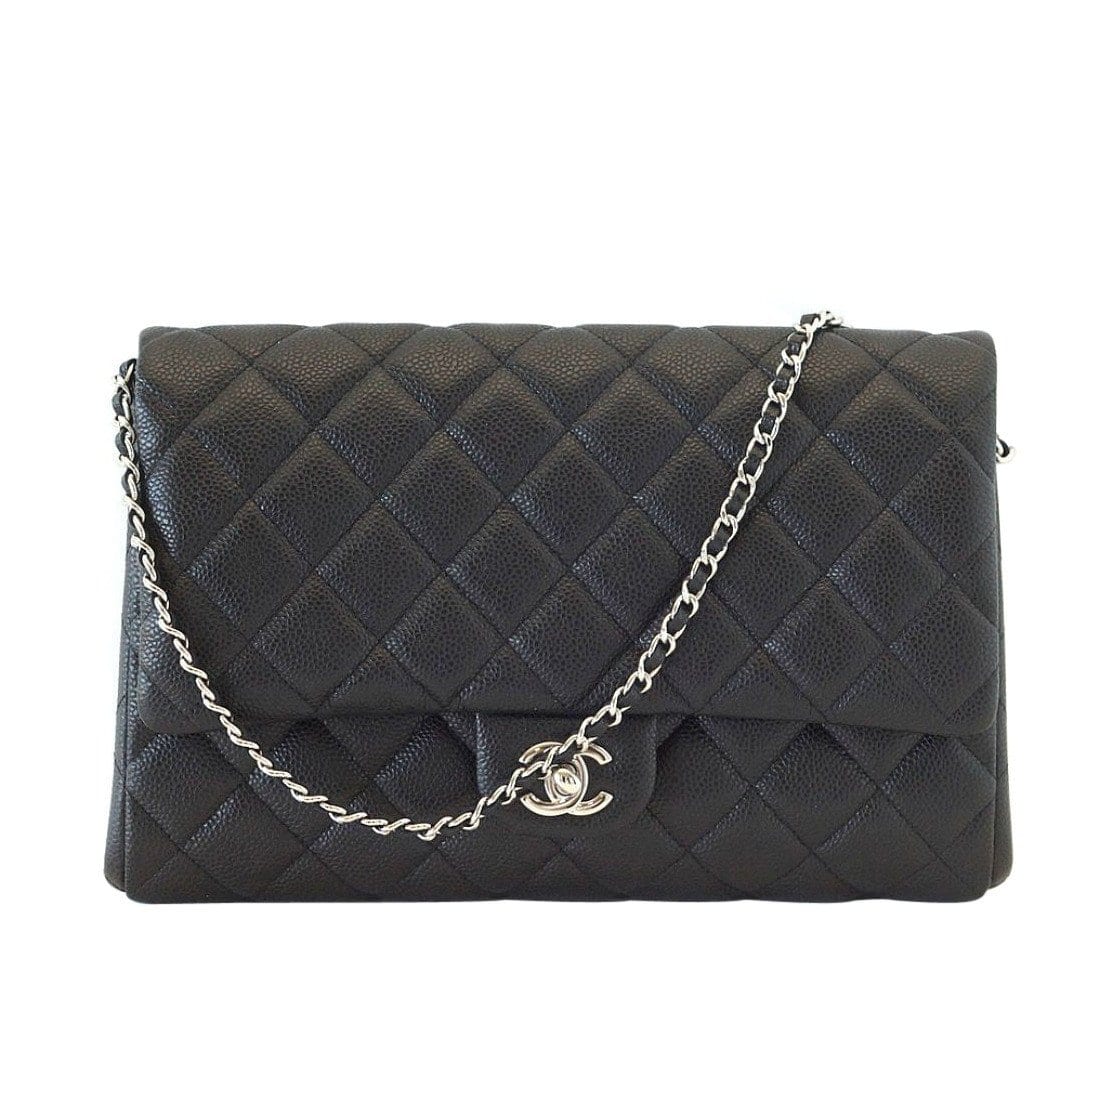 CHANEL Leather Bags & Handbags for Women, Authenticity Guaranteed